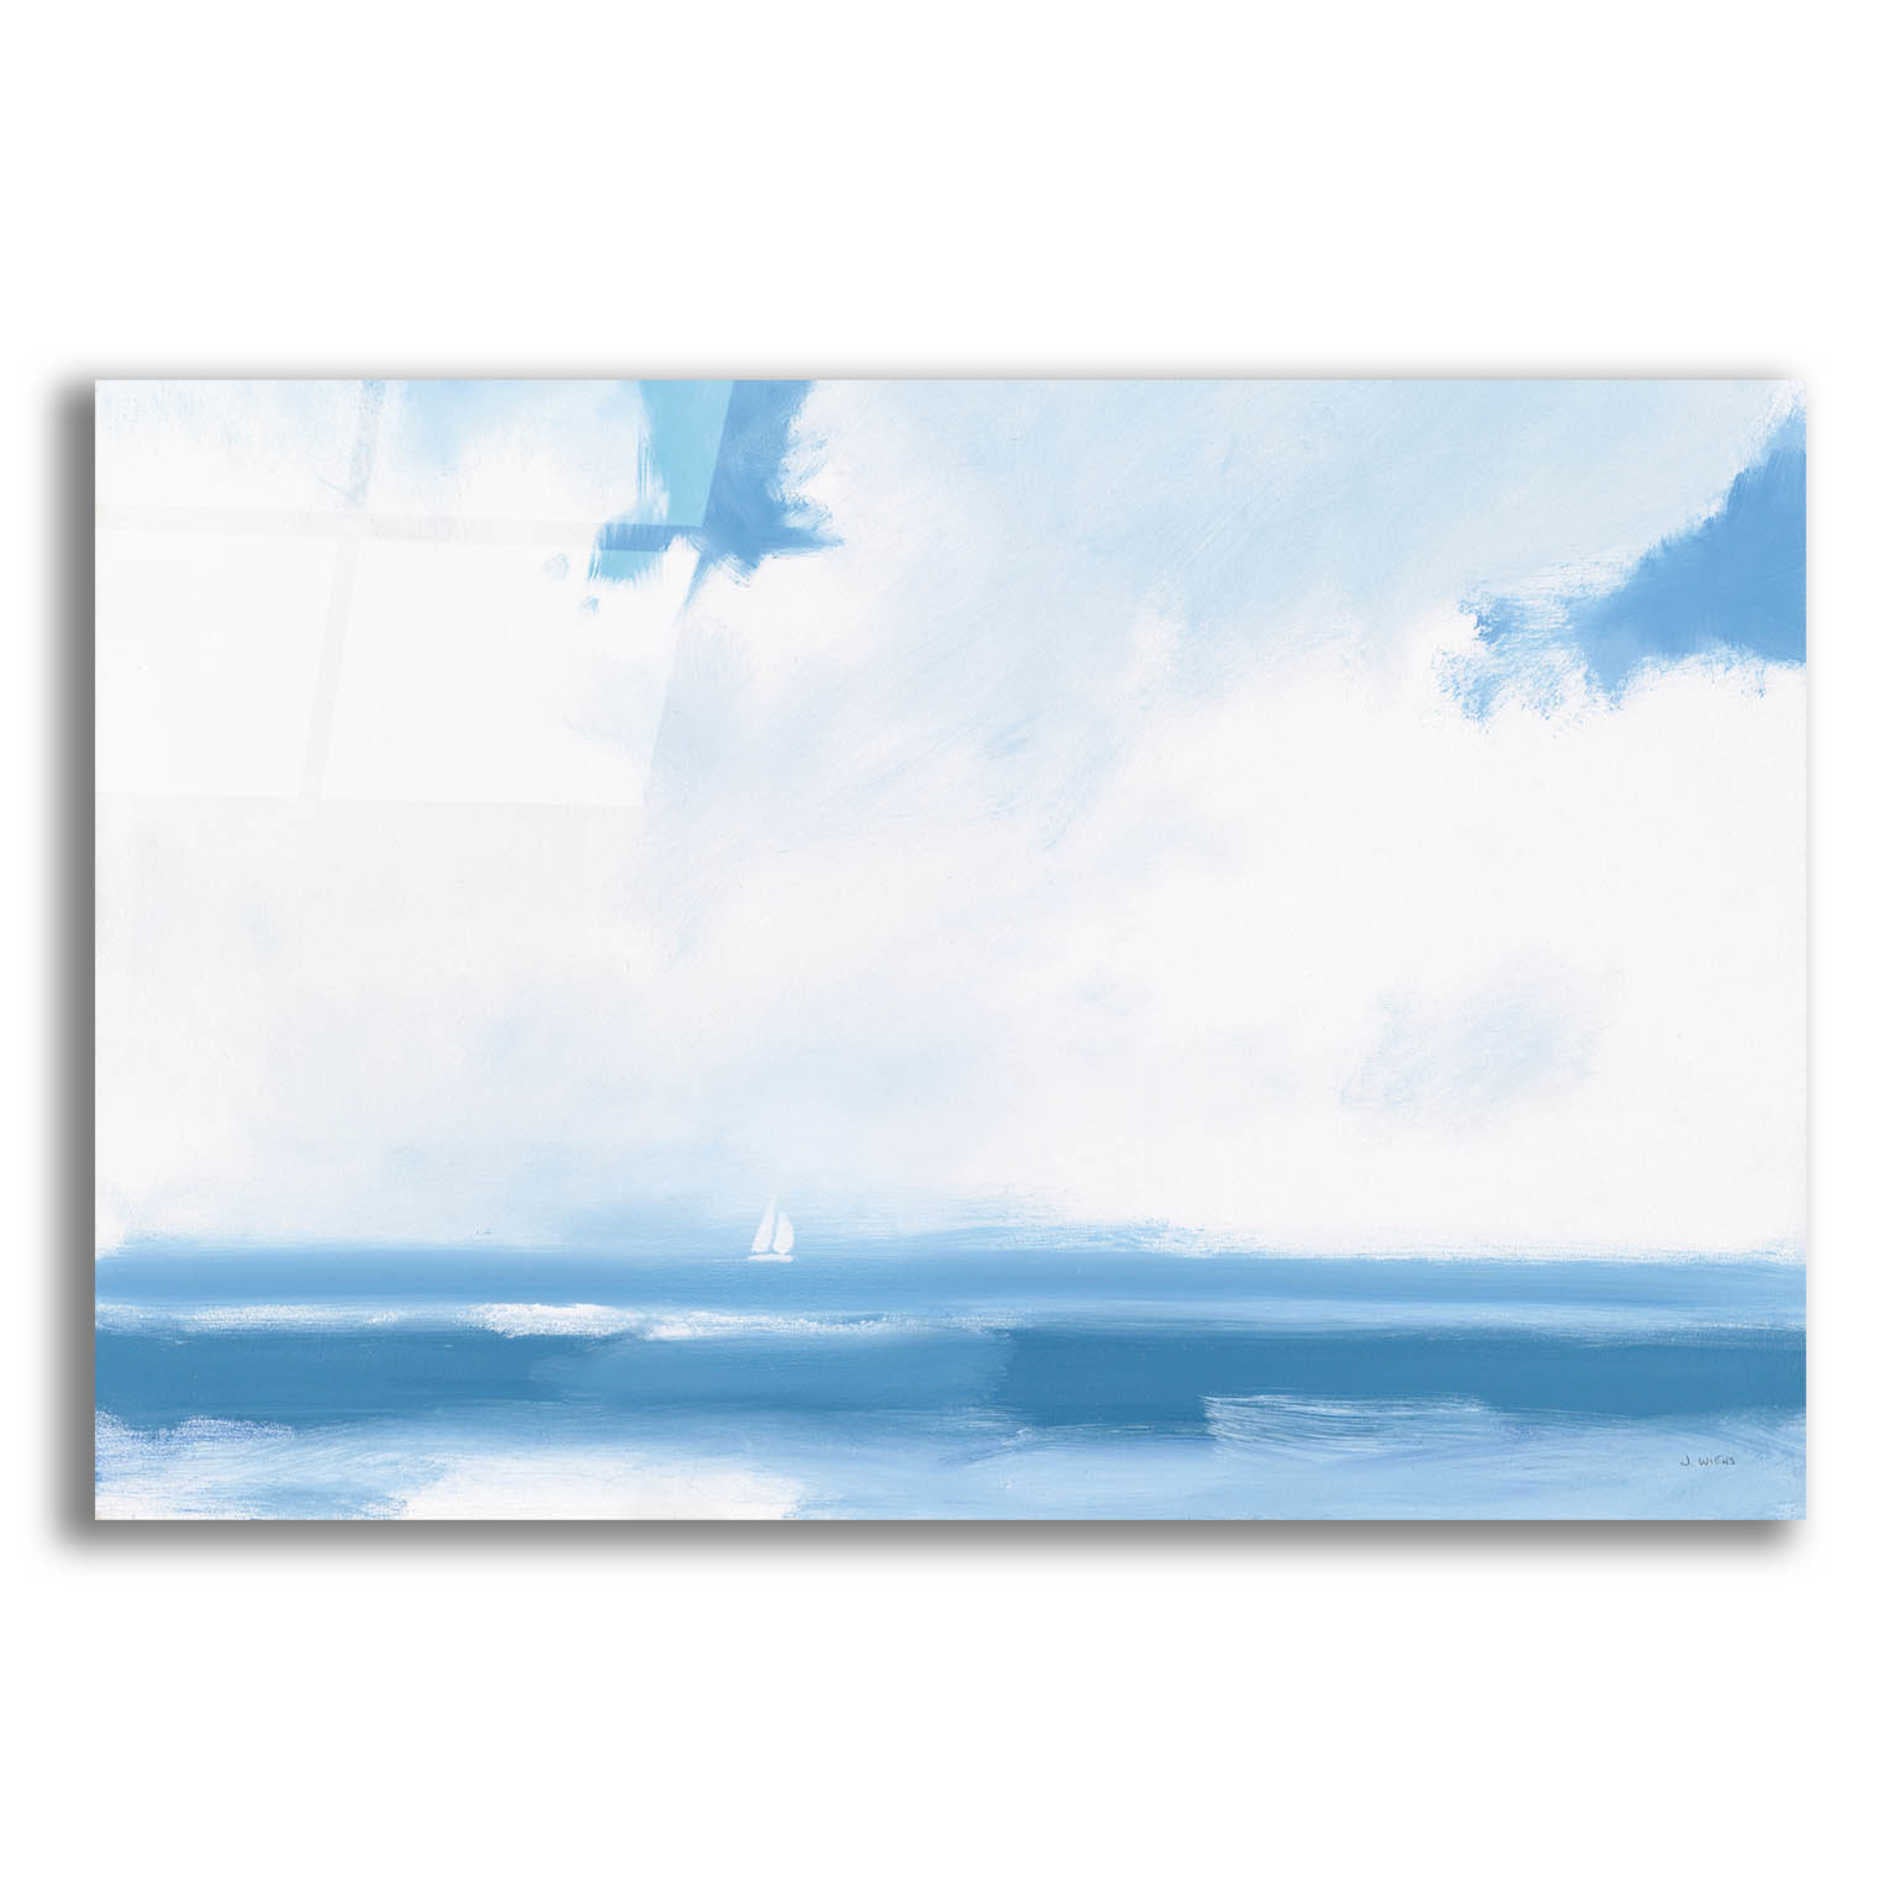 Epic Art 'Oceanview Sail' by James Wiens, Acrylic Glass Wall Art,18x12x1.1x0,26x18x1.1x0,40x26x1.74x0,60x40x1.74x0